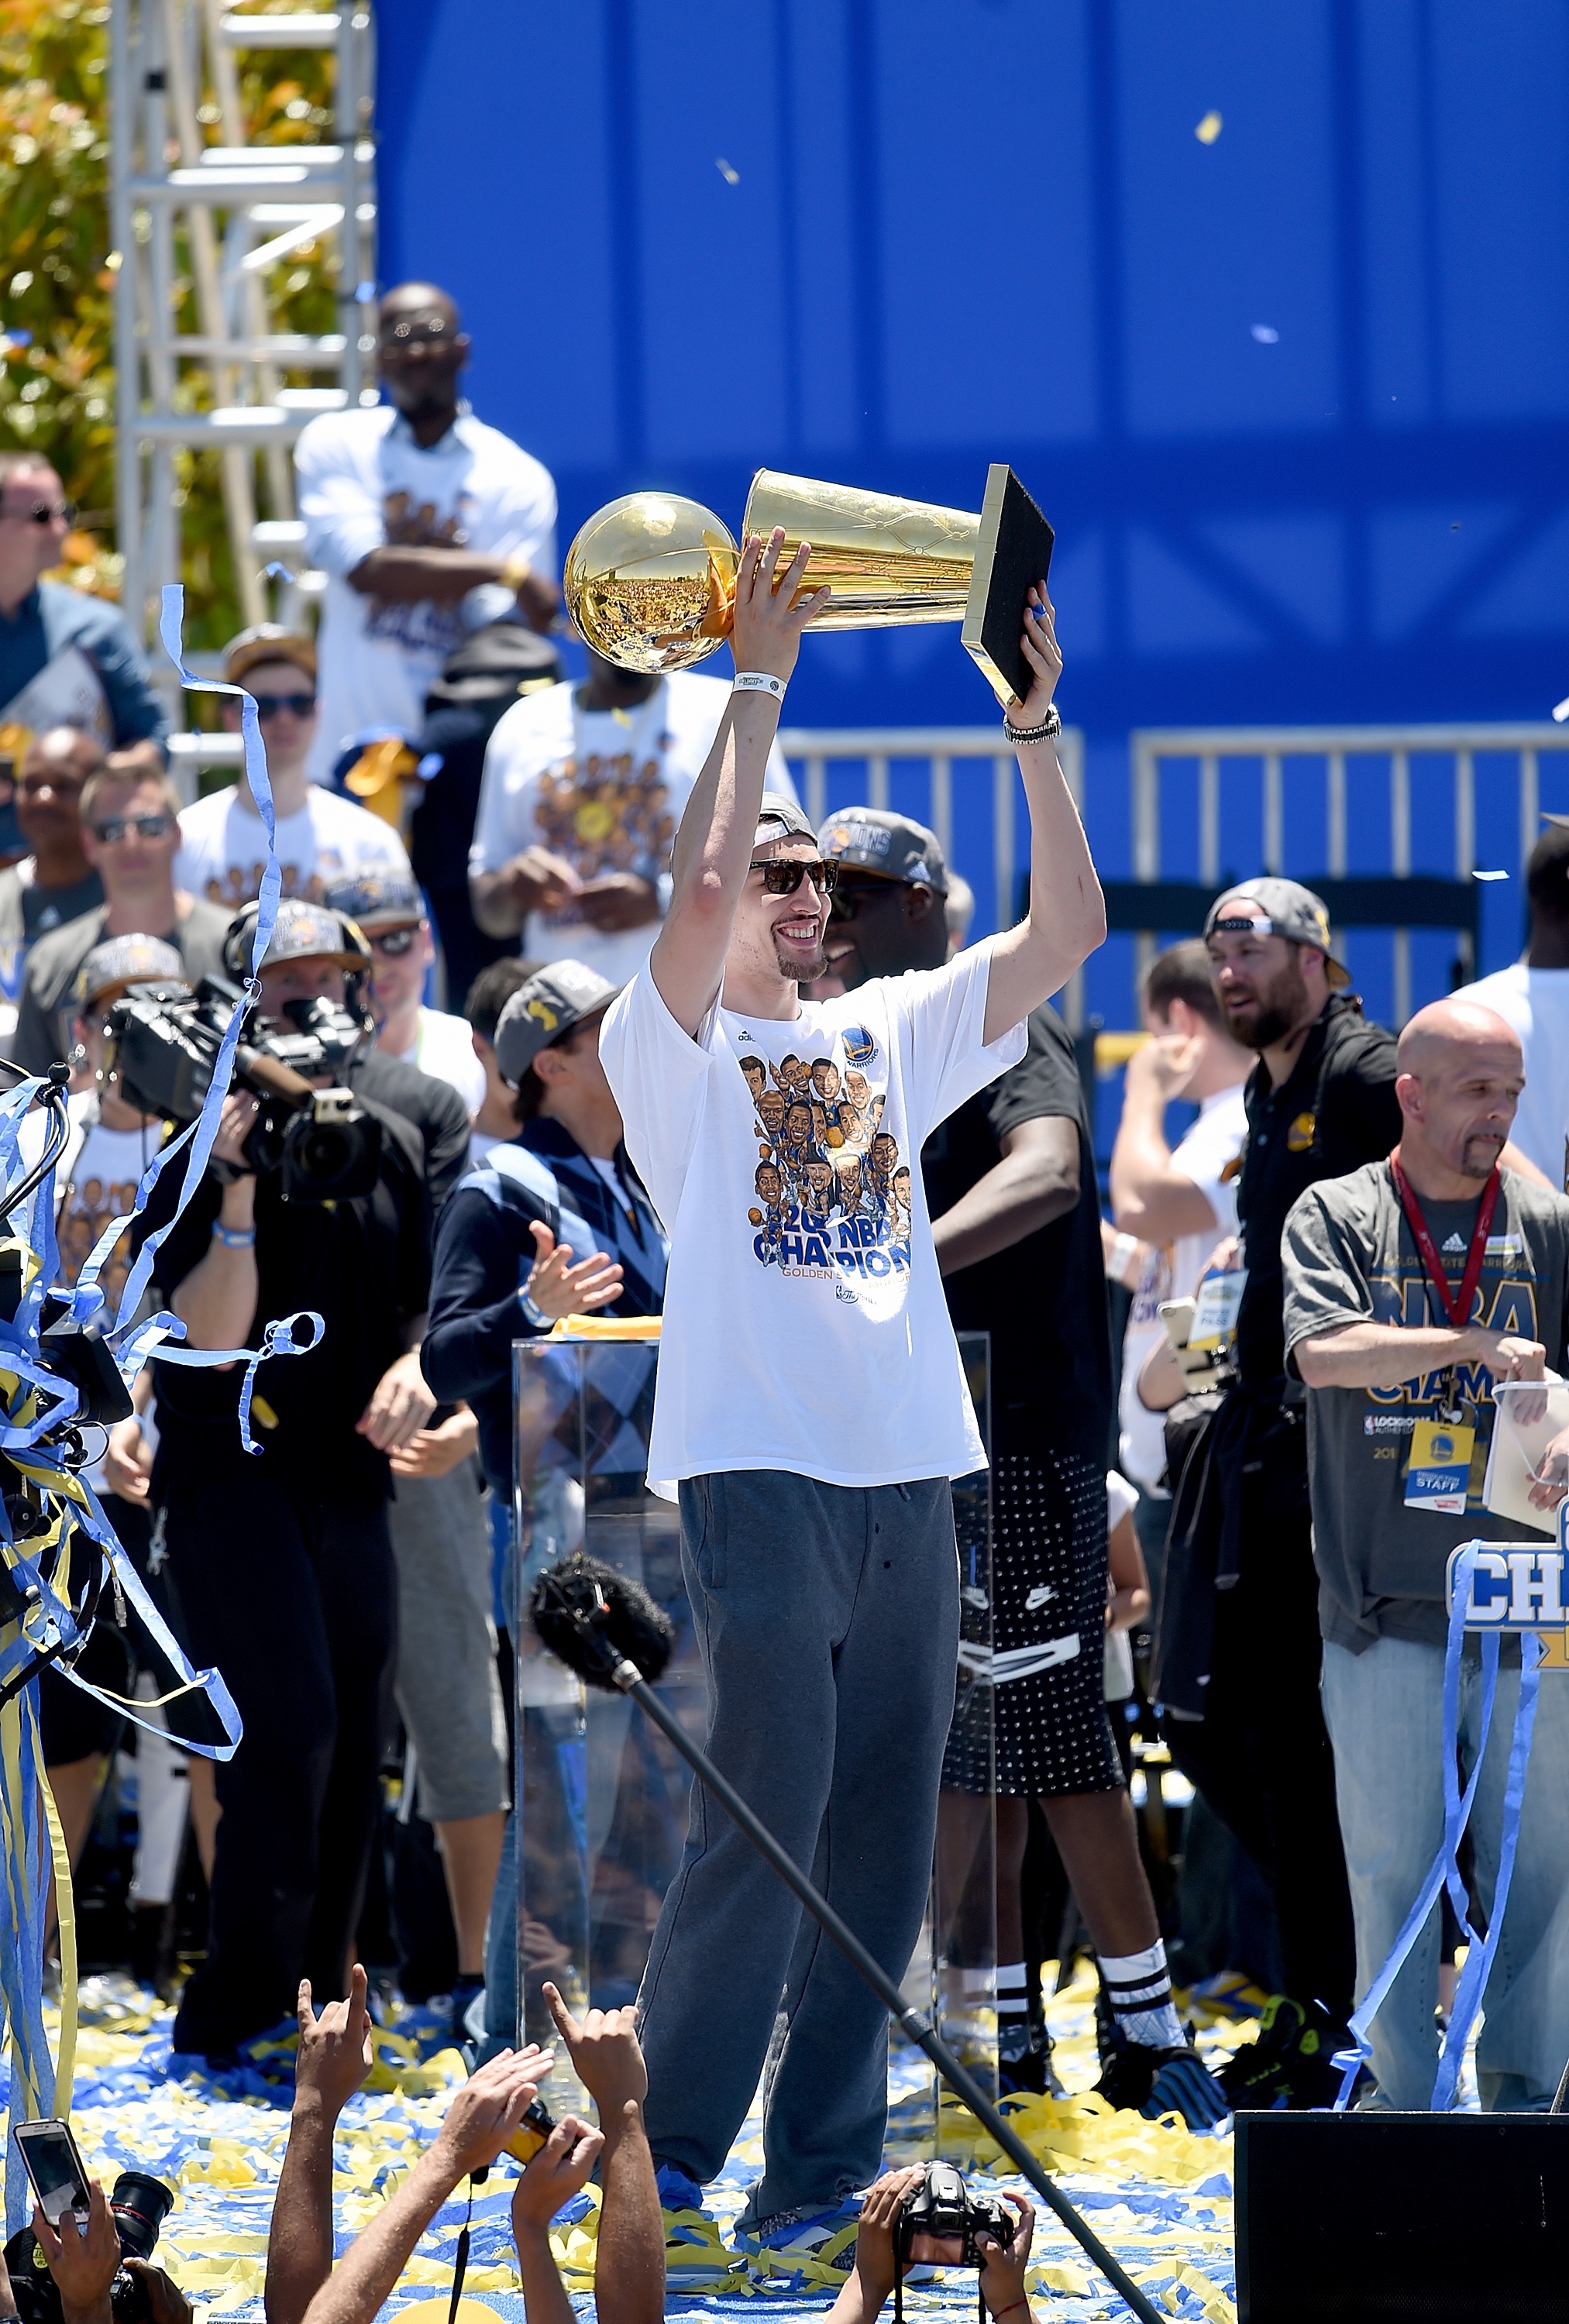 OAKLAND, CA - JUNE 19:  Klay Thompson #11 of the Golden State Warriors holding the Larry O'Brien Trophy celebrates with his teammates at The Henry J. Kaiser Convention Center during thier Victory Parade and Rally on June 19, 2015 in Oakland, California.  (Photo by Thearon W. Henderson/Getty Images)